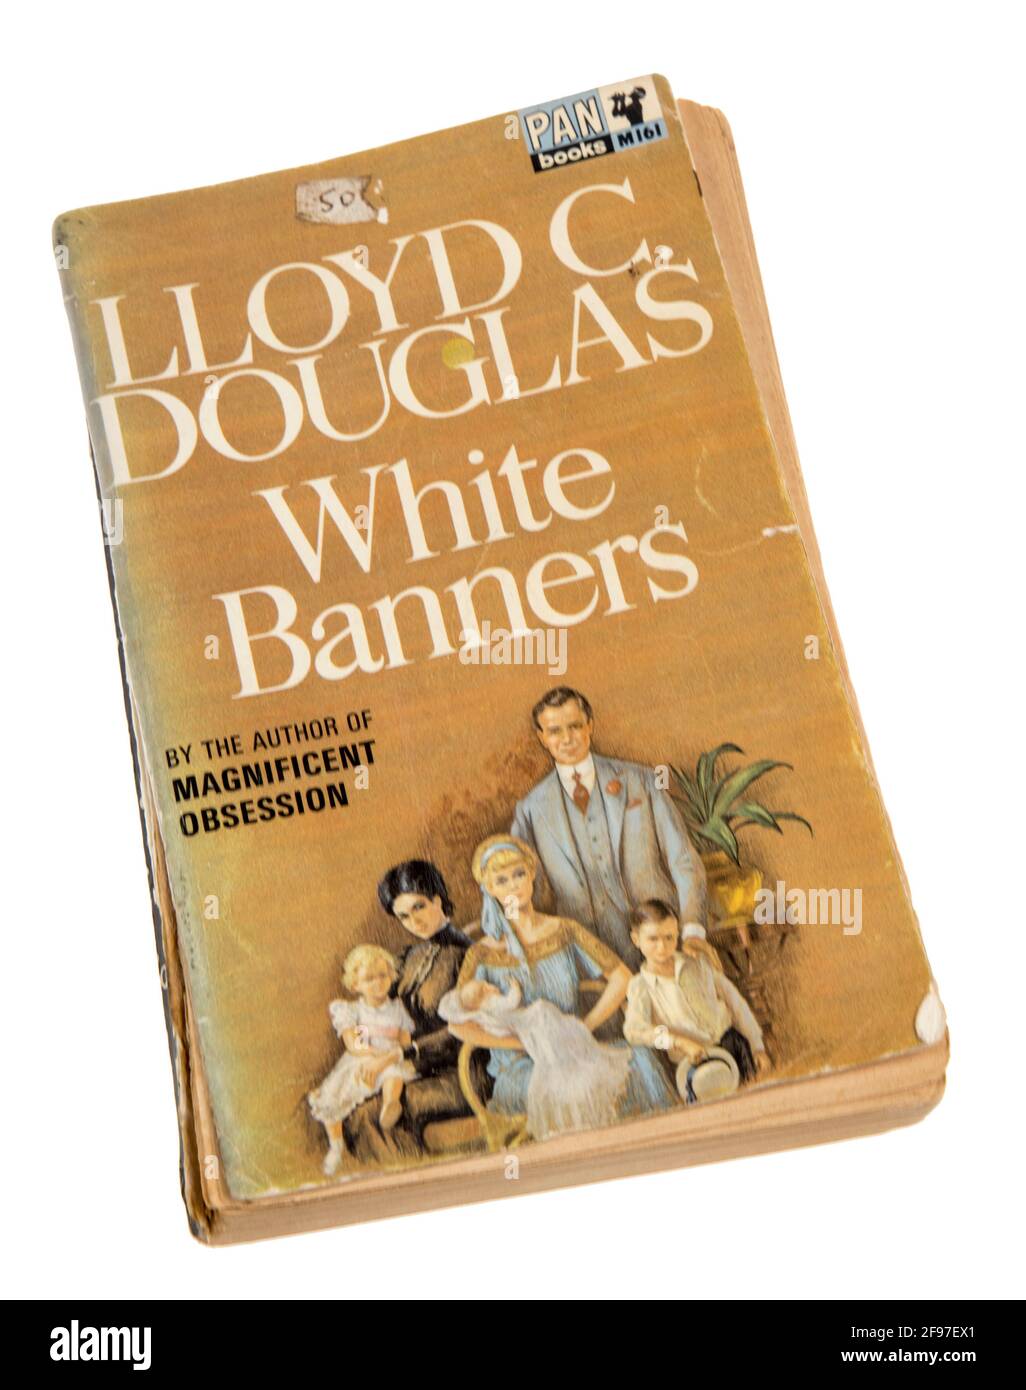 White Banners by Lloyd C. Douglas, first published 1936 and published by Pan in 1966 Stock Photo